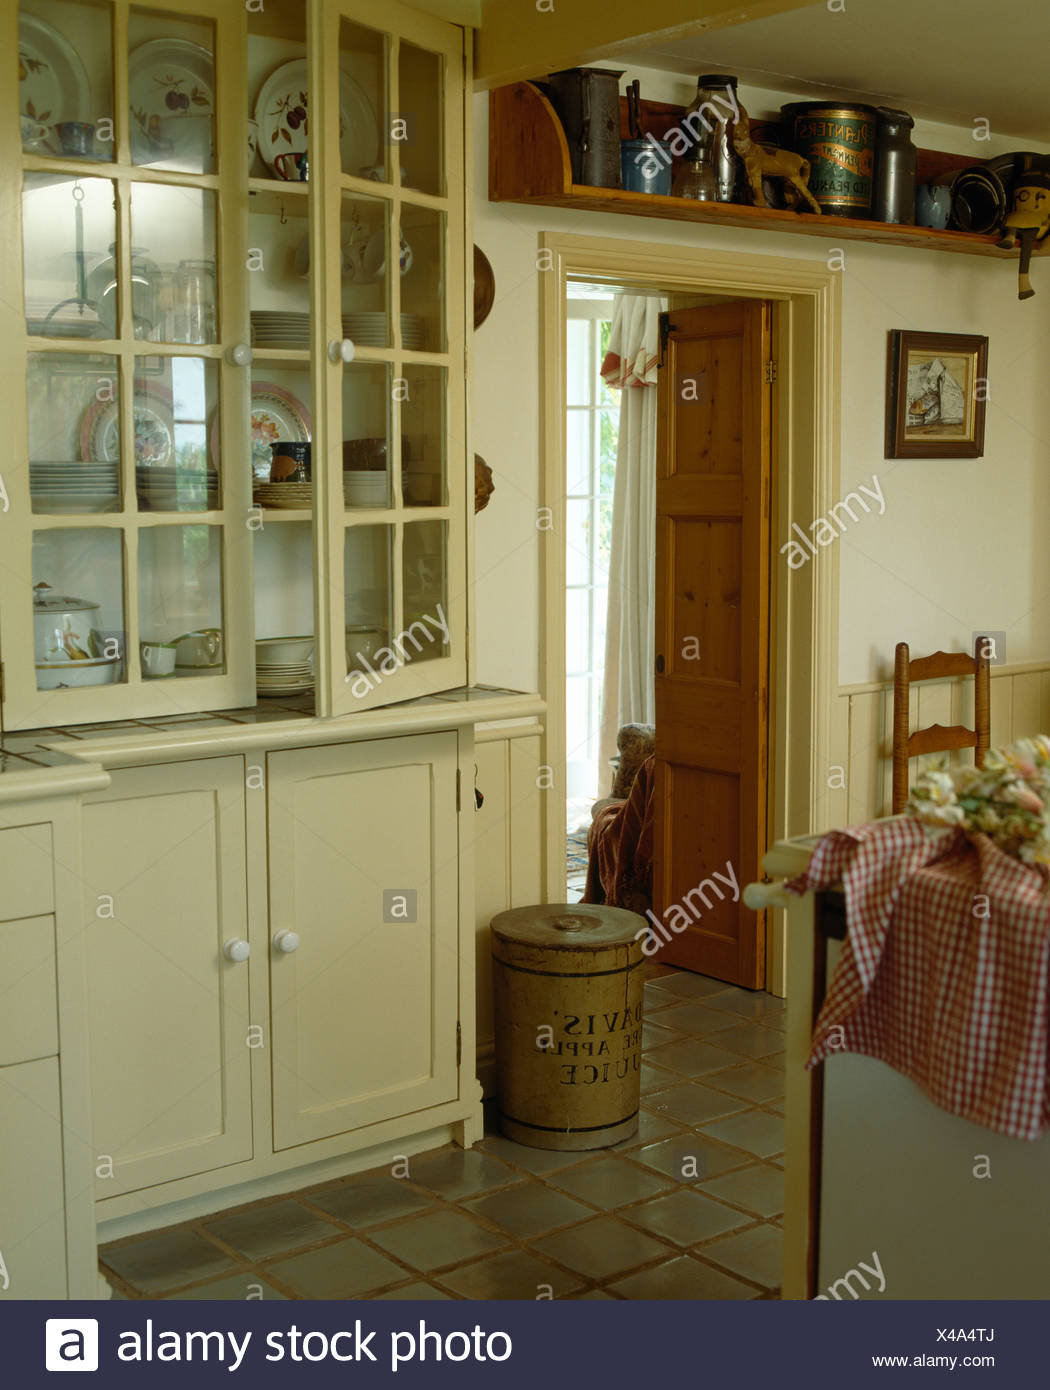 Fitted Cream Dresser With Glazed Doors In Country Kitchen Stock